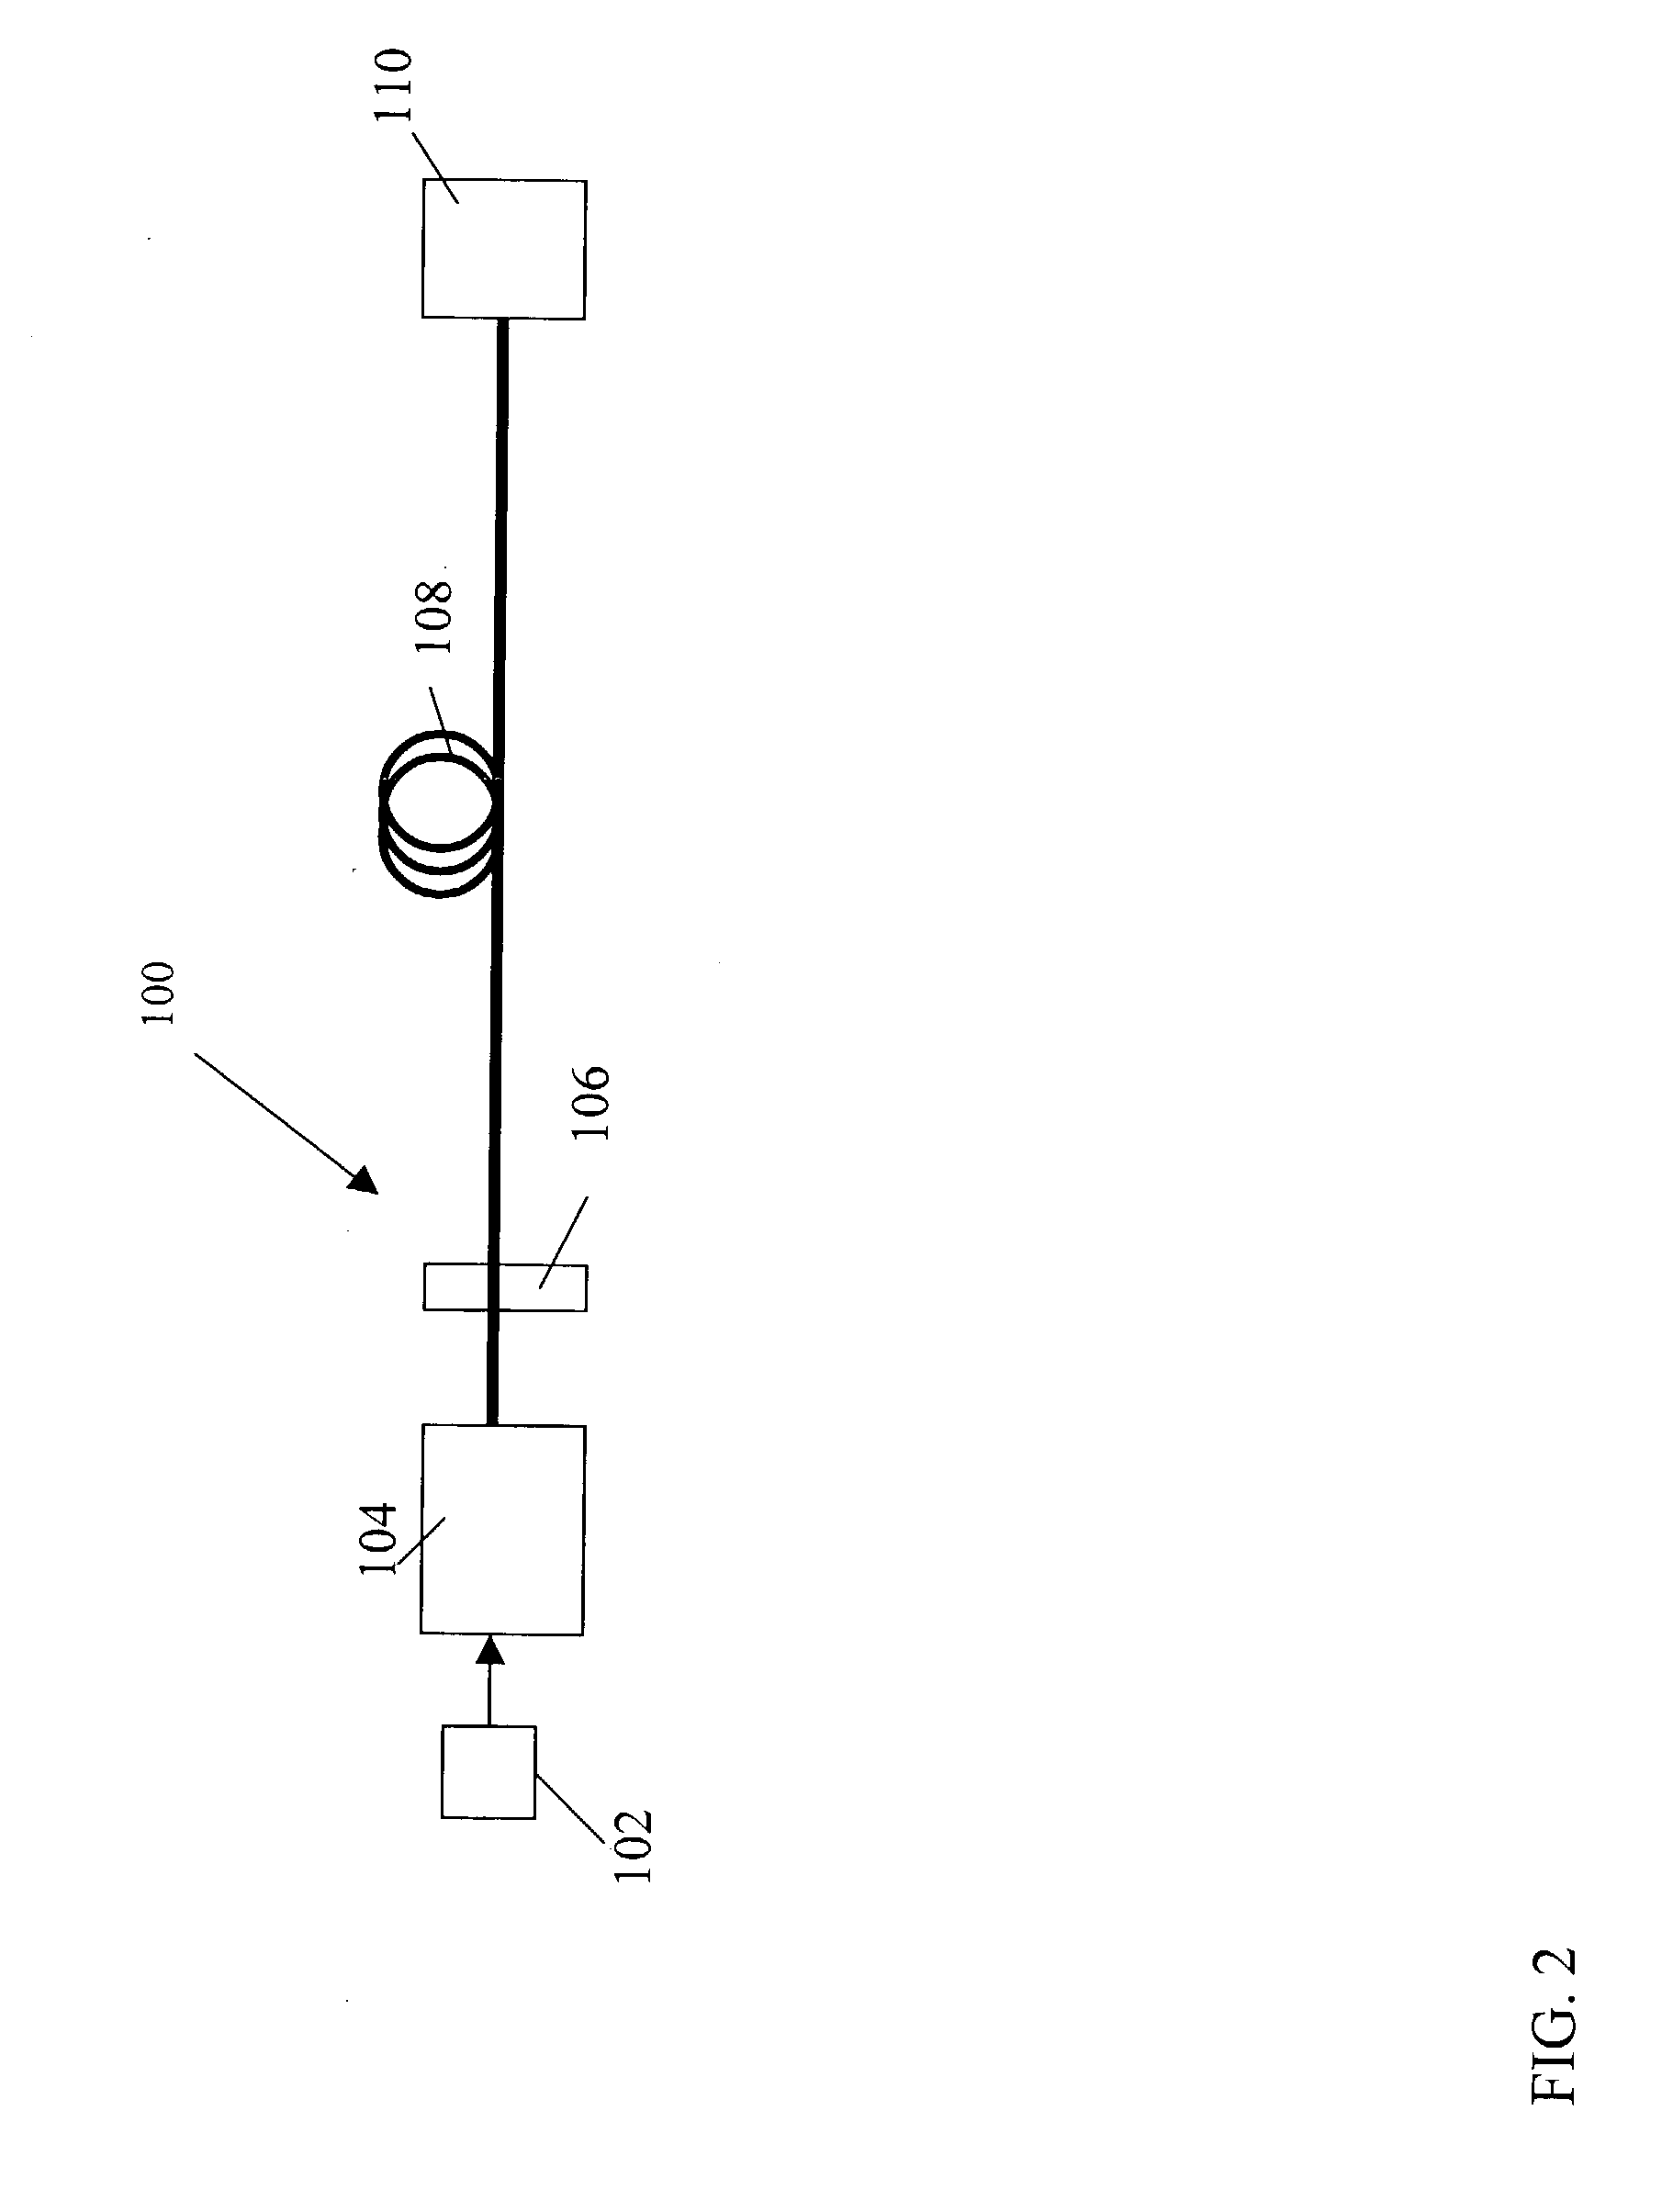 High-speed transmission system comprising a coupled multi-cavity optical discriminator